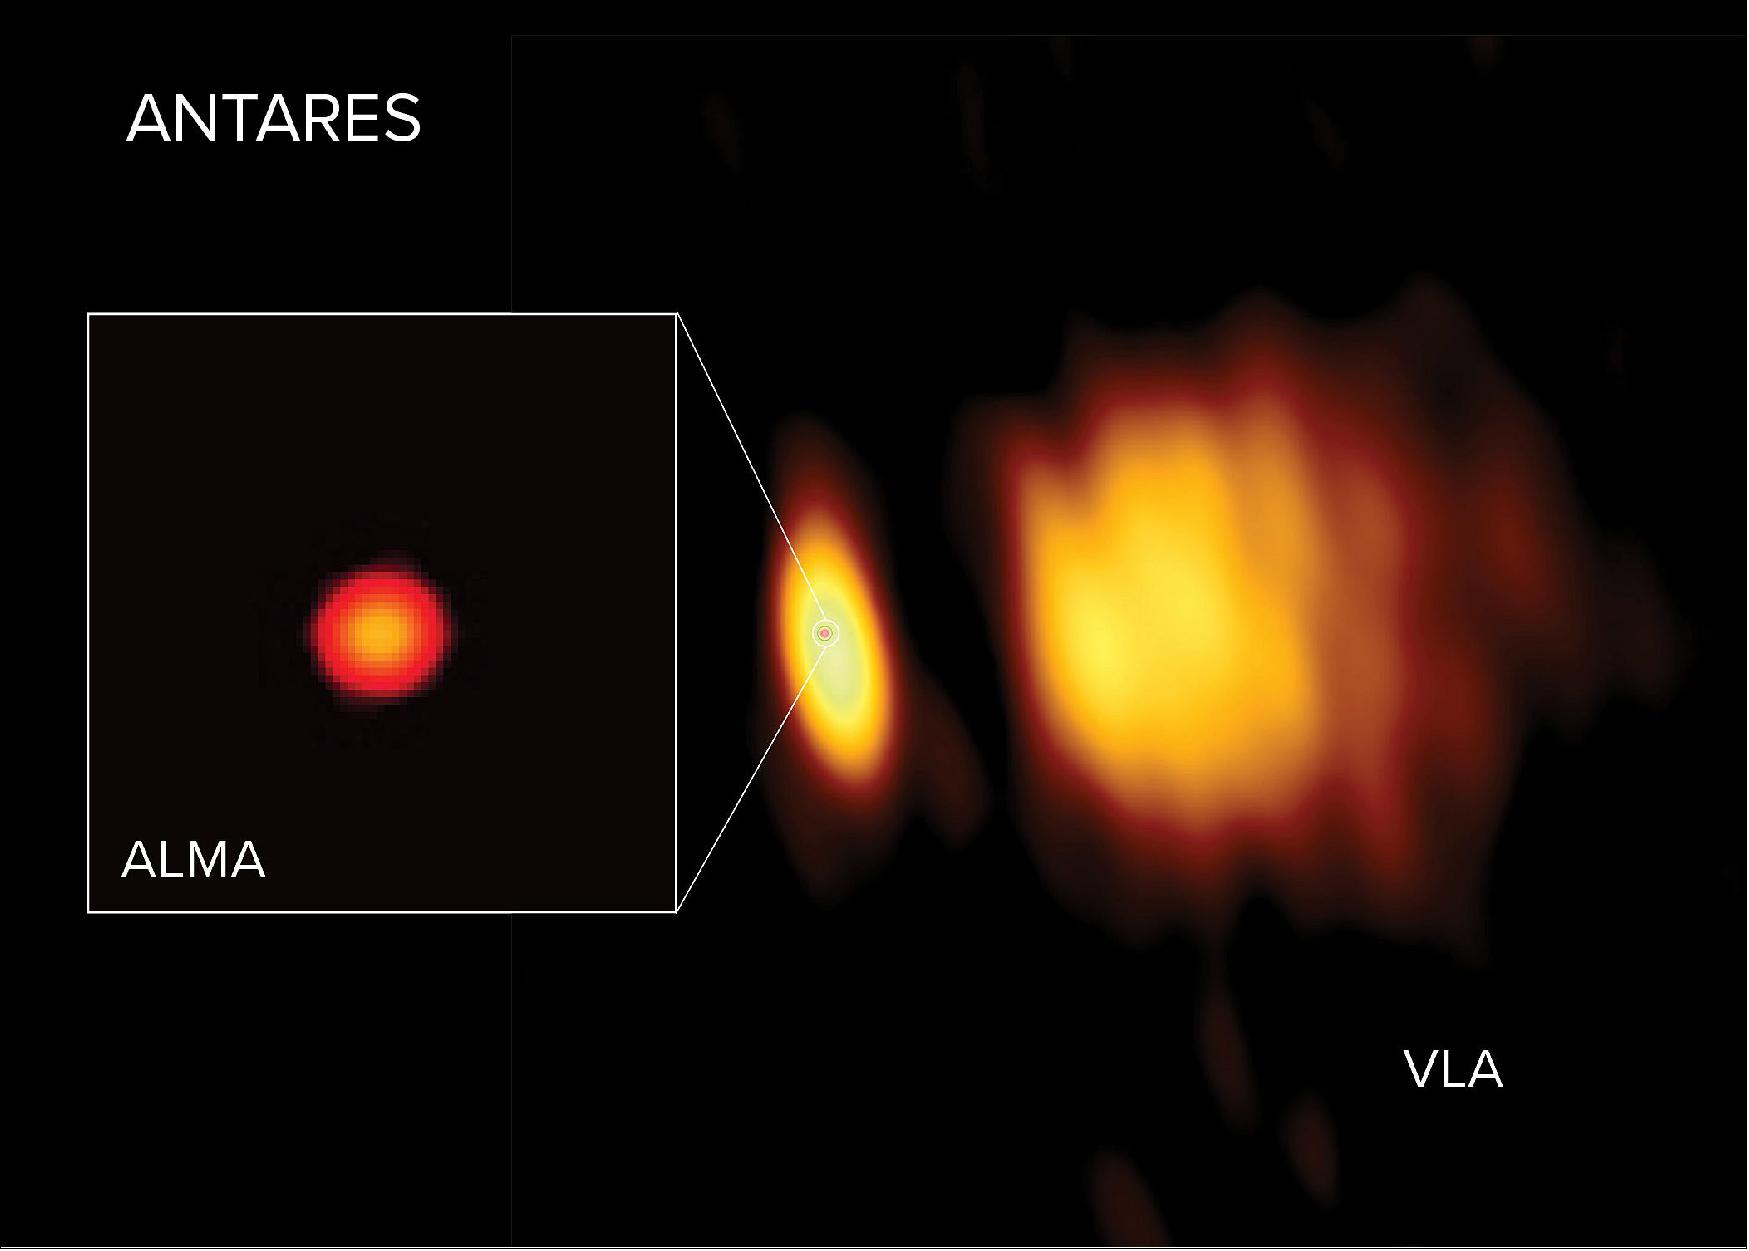 Figure 50: Radio images of Antares with ALMA and the VLA. ALMA observed Antares close to its surface in shorter wavelengths, and the longer wavelengths observed by the VLA revealed the star’s atmosphere further out. In the VLA image a huge wind is visible on the right, ejected from Antares and lit up by its smaller but hotter companion star Antares B (image credit: ALMA (ESO/NAOJ/NRAO), E. O’Gorman; NRAO/AUI/NSF, S. Dagnello)